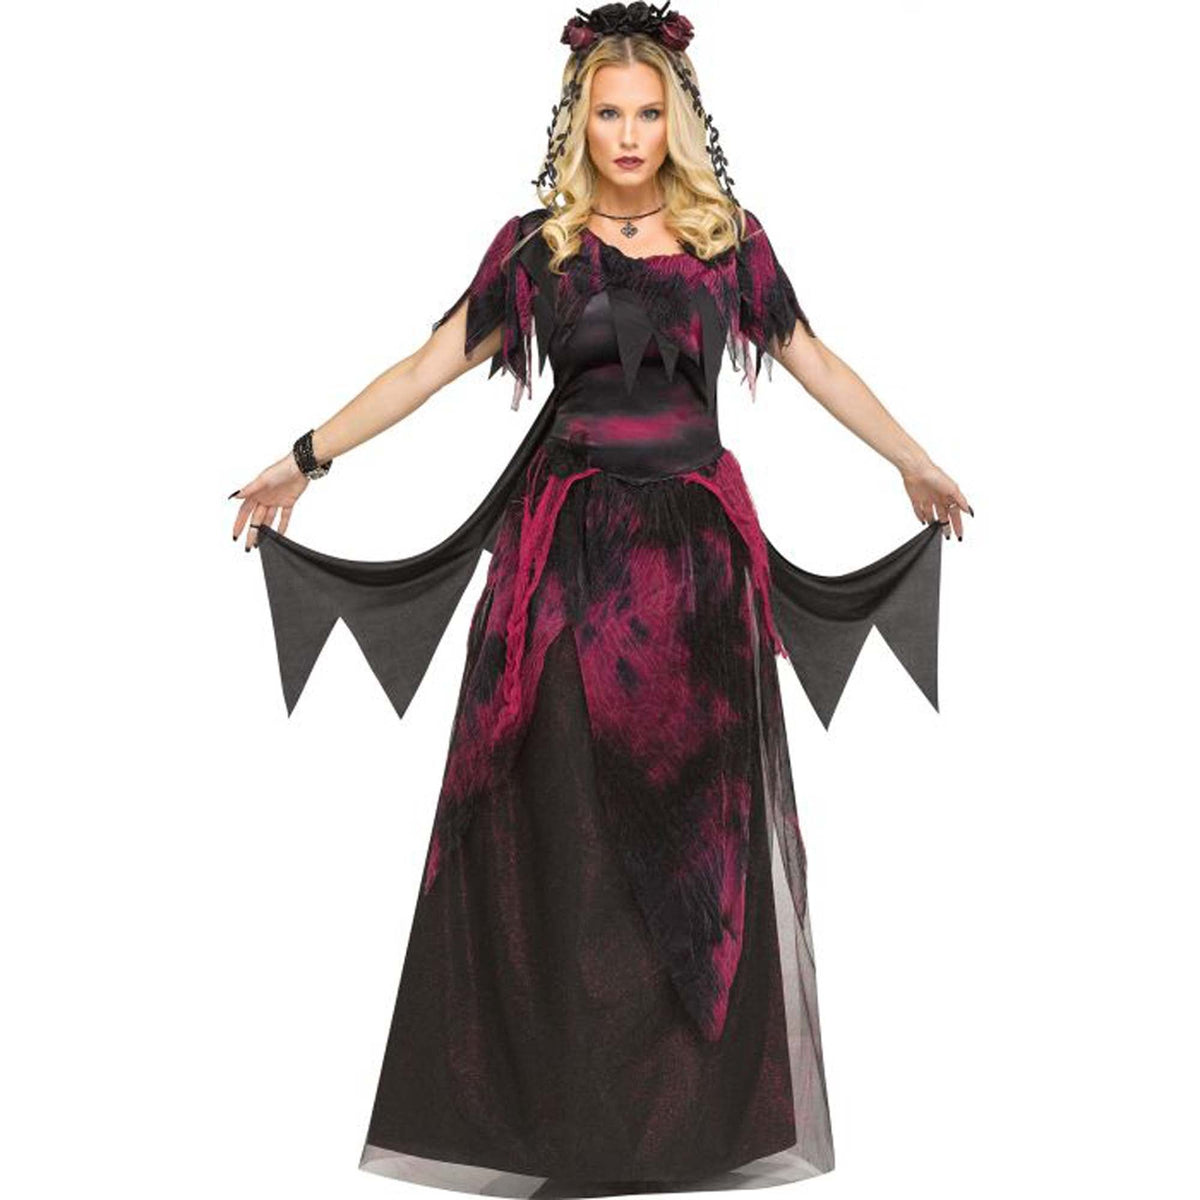 FUN WORLD Costumes Twilight Fairy Costume for Adults, Black and Purple Dress